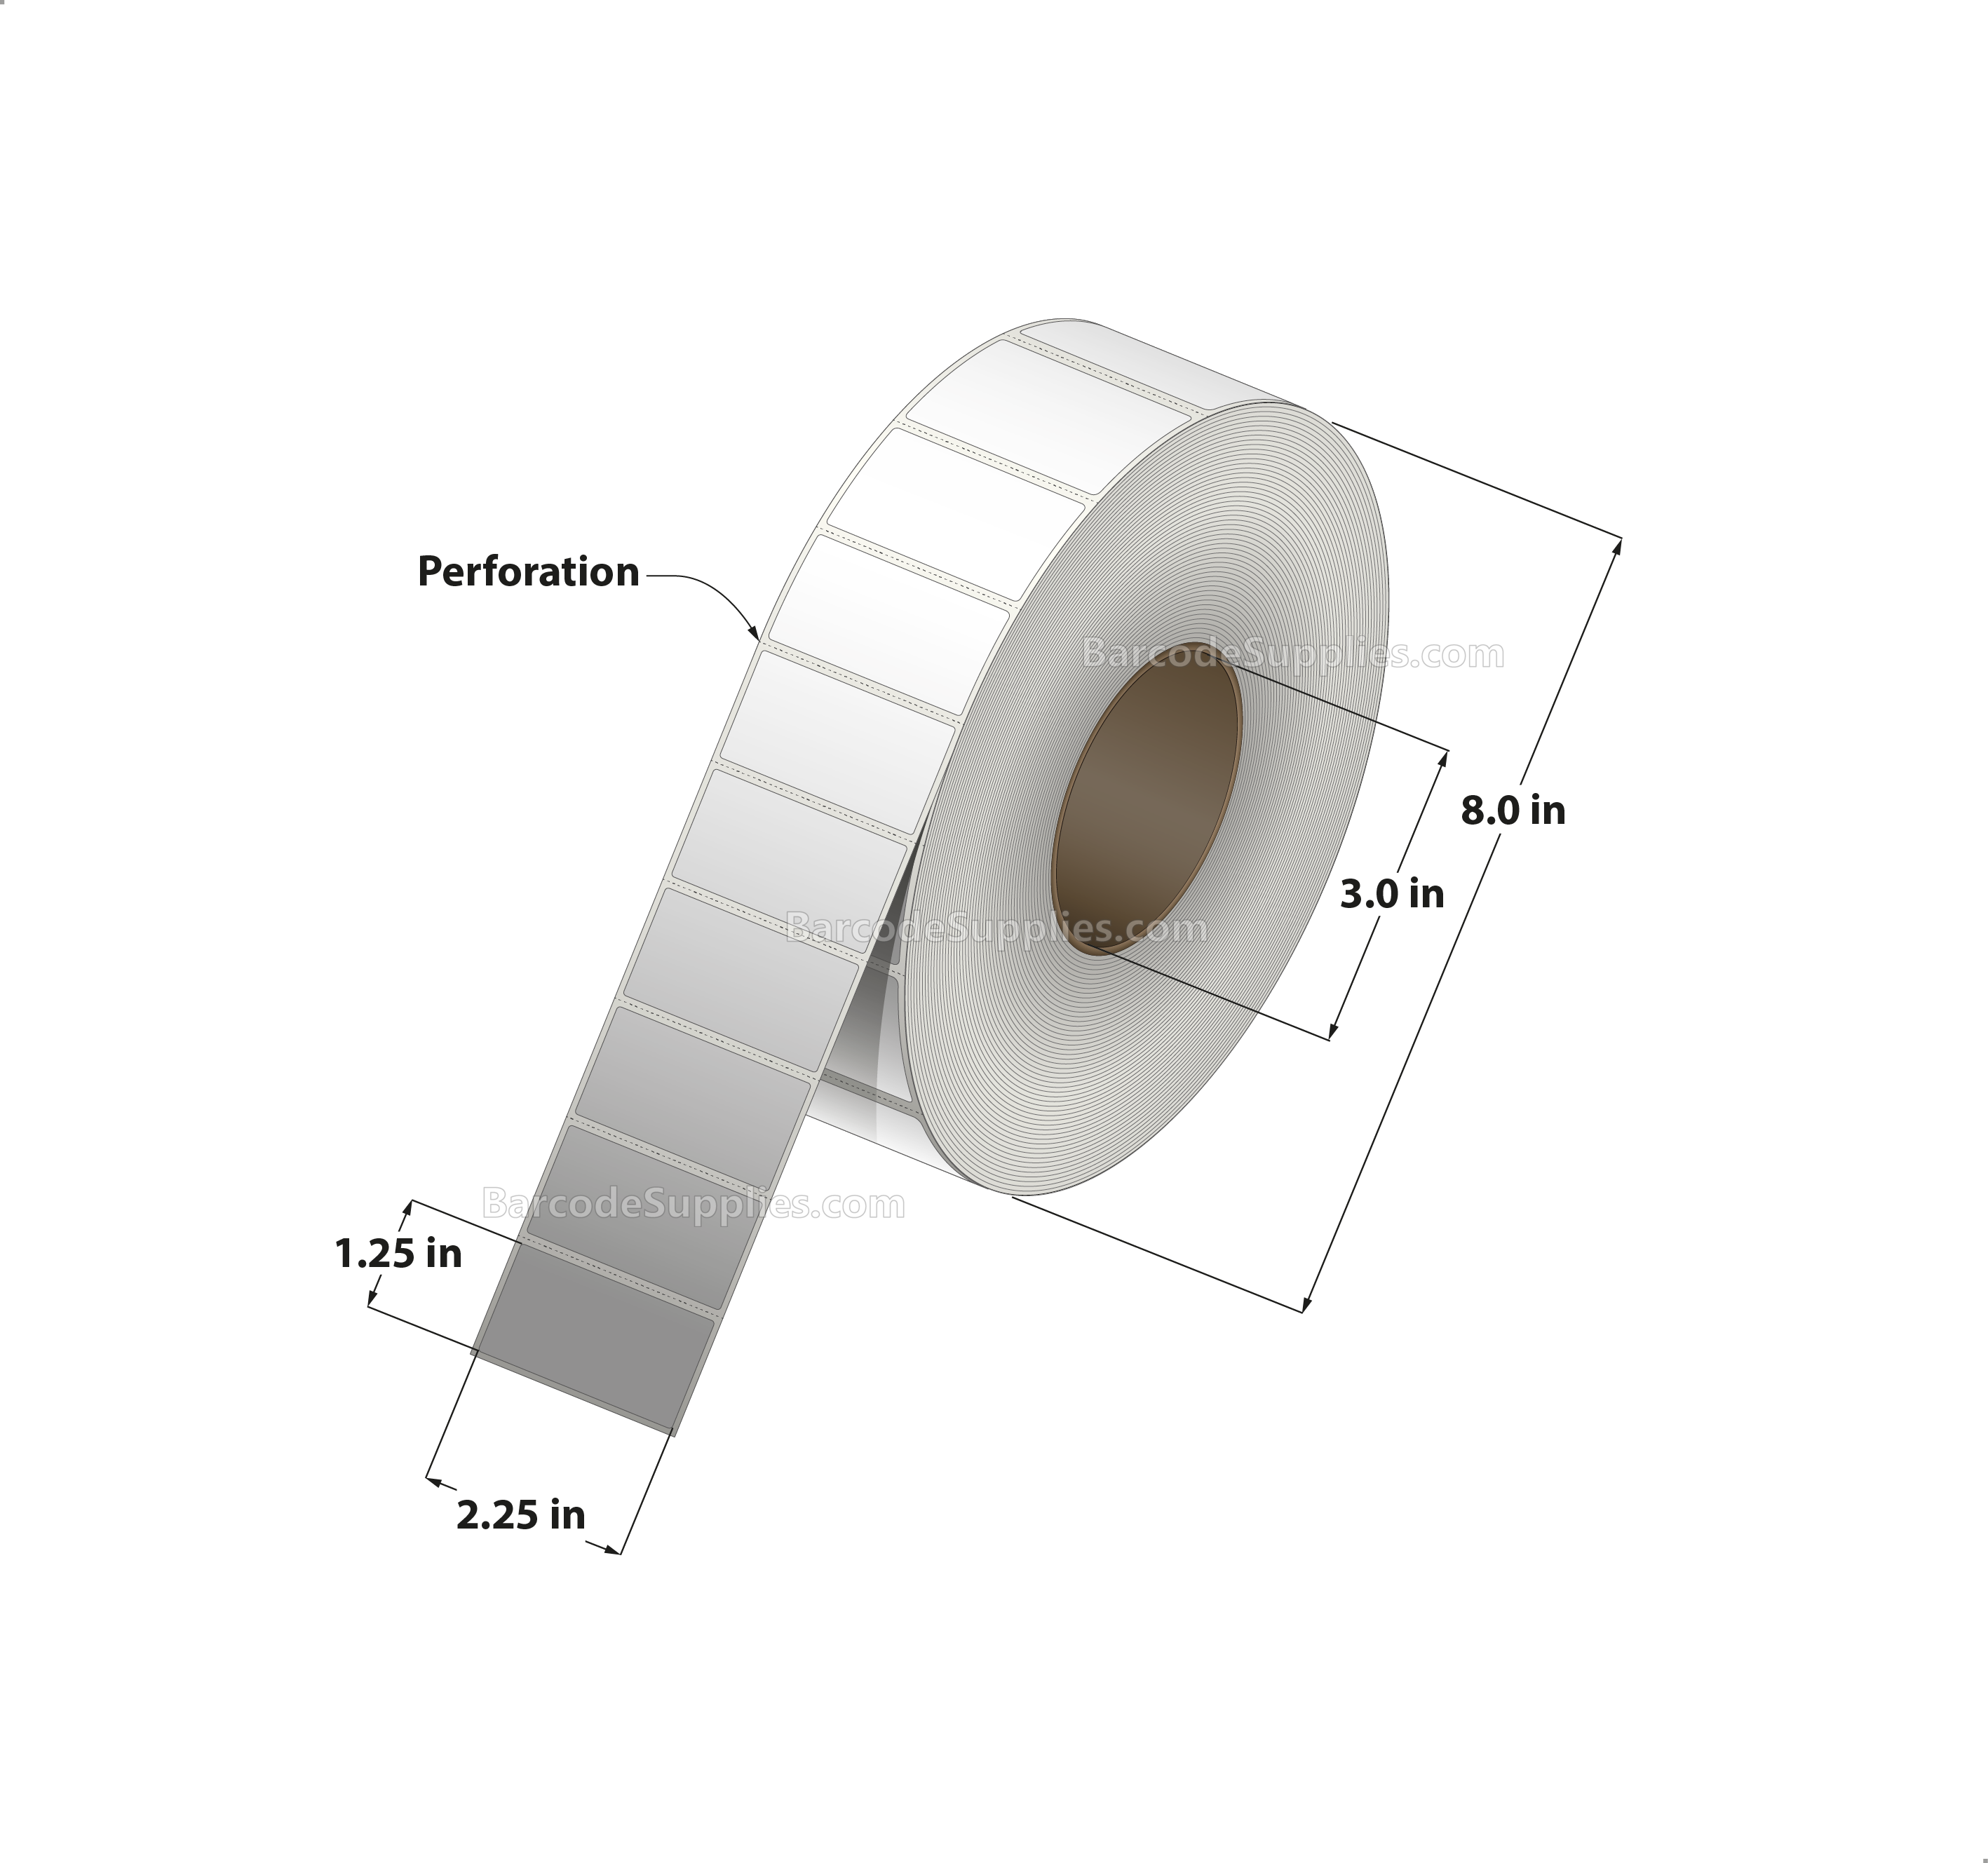 2.25 x 1.25 Direct Thermal White Labels With Rubber Adhesive - Perforated - 5087 Labels Per Roll - Carton Of 4 Rolls - 20348 Labels Total - MPN: DT225125-3P